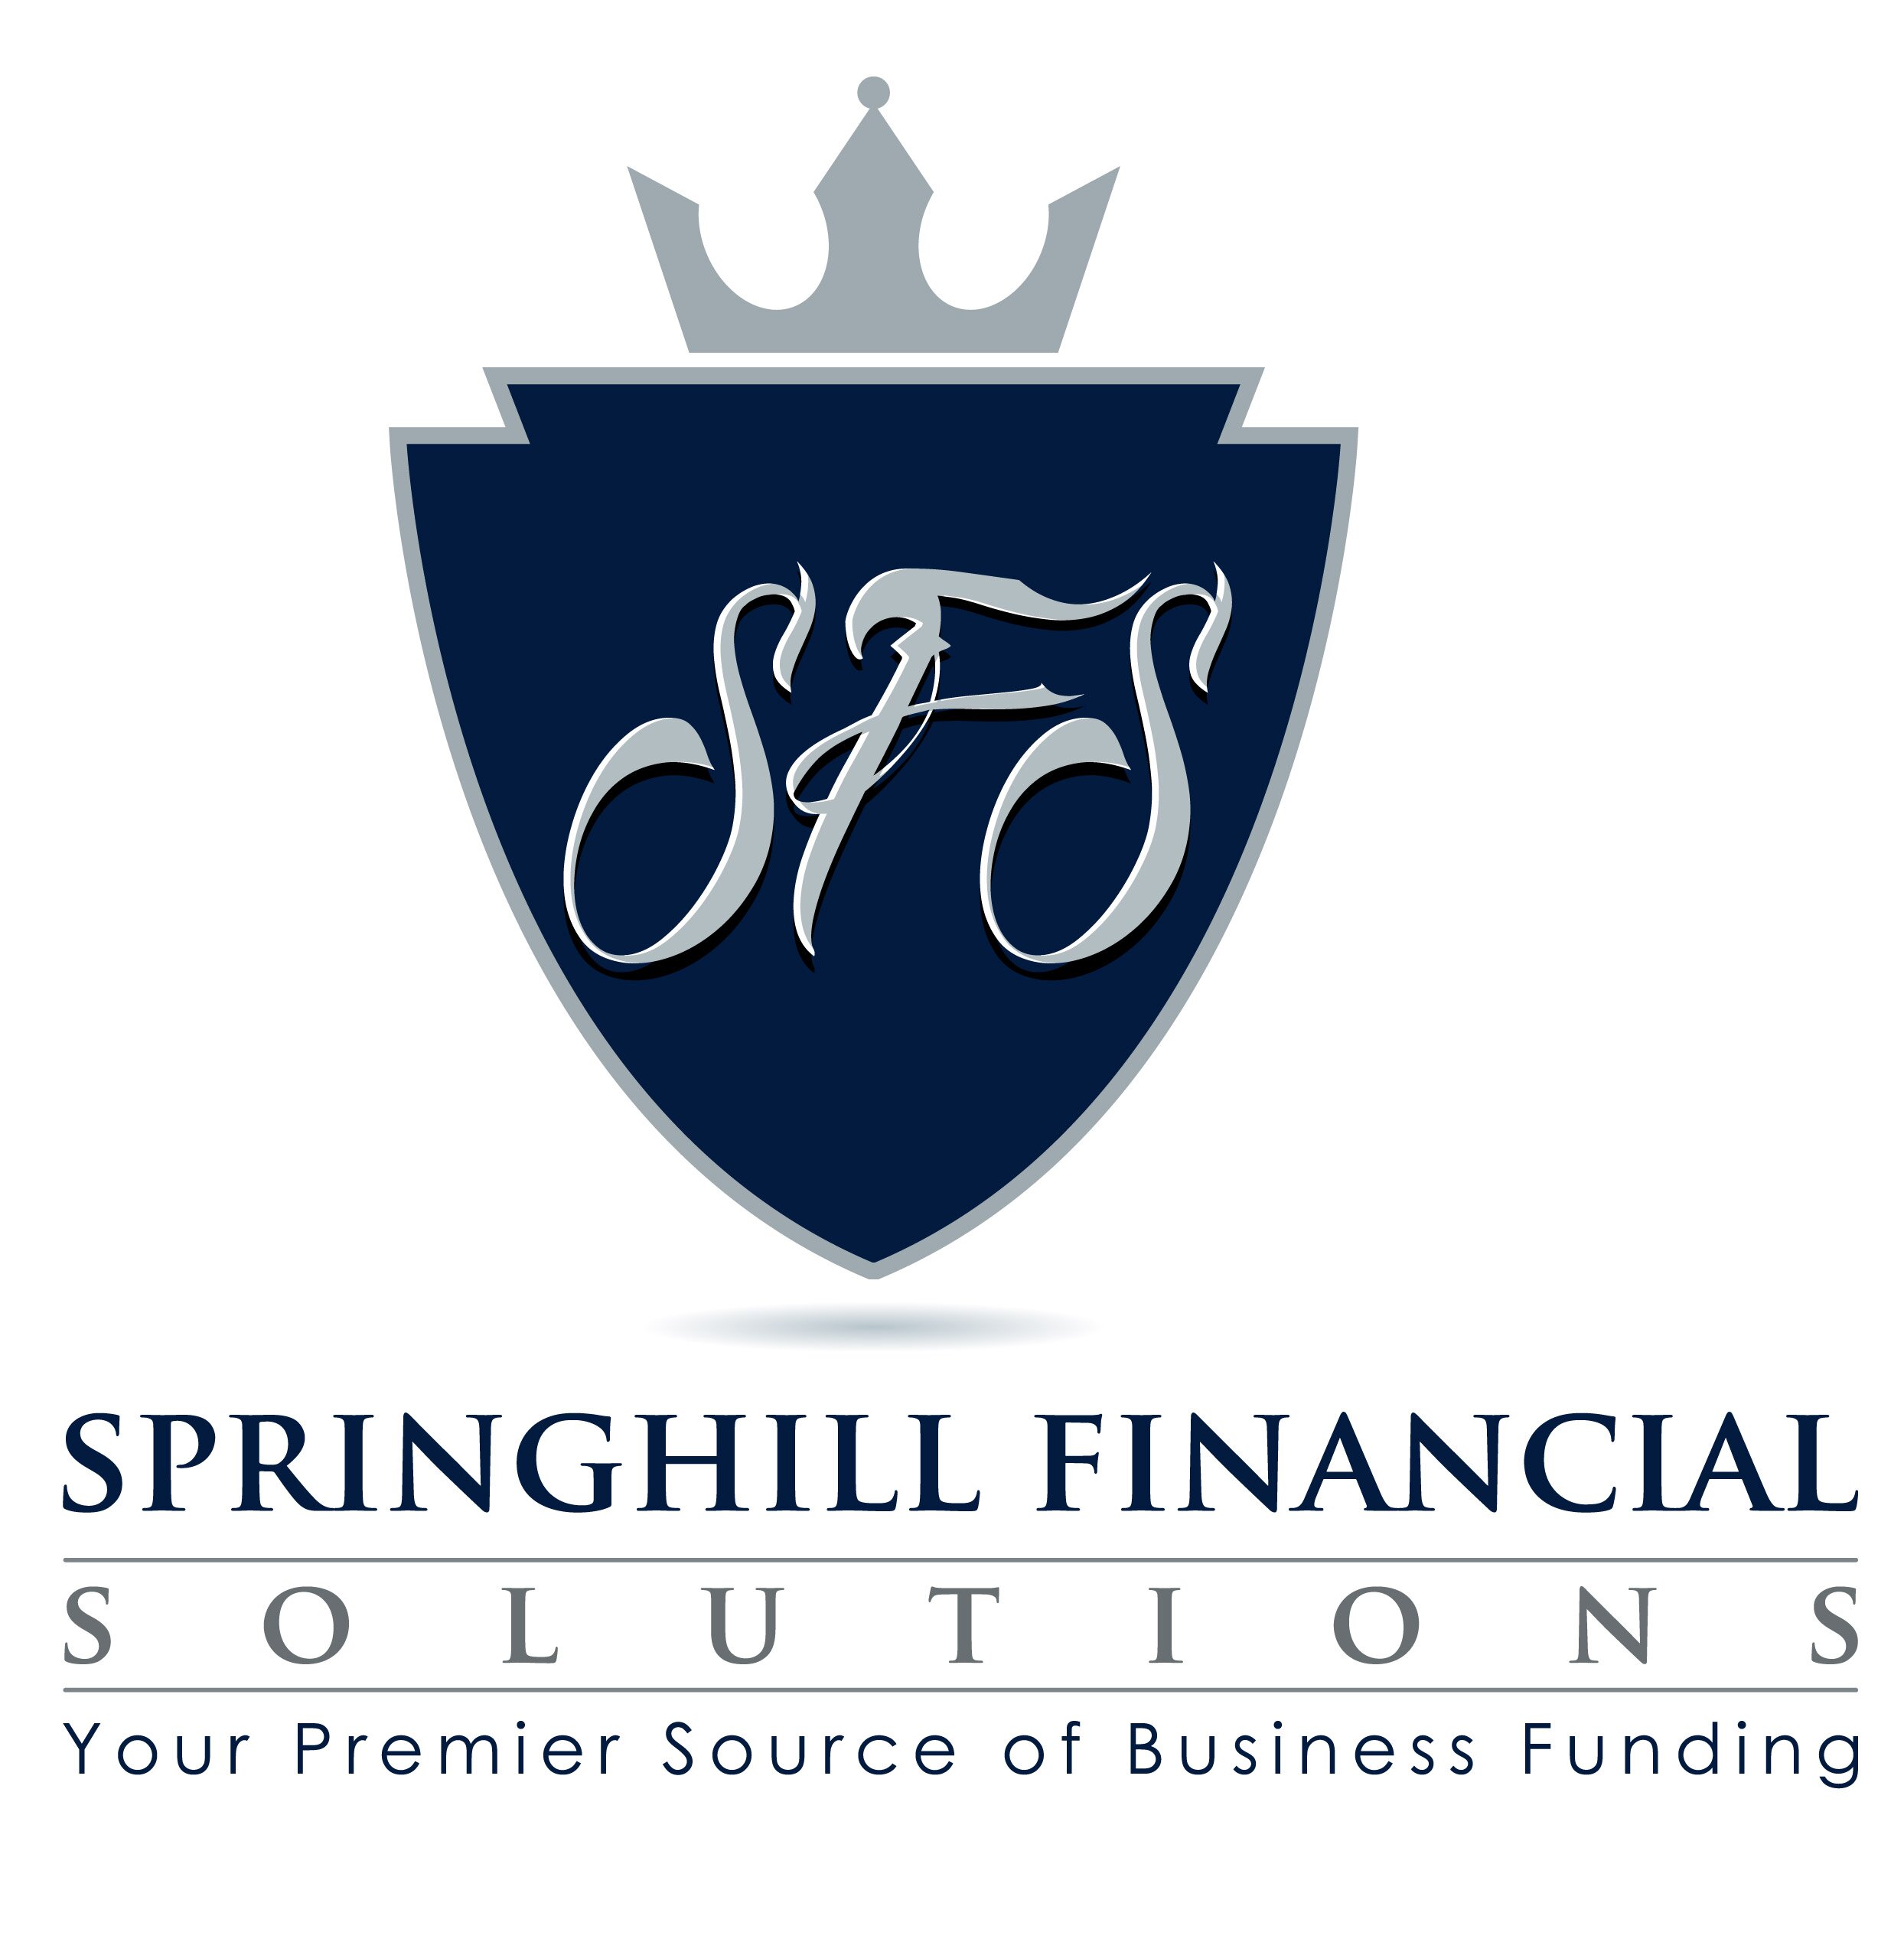 Springhill Financial Solutions: Your Premier Source of Business Funding and Credit Repair!